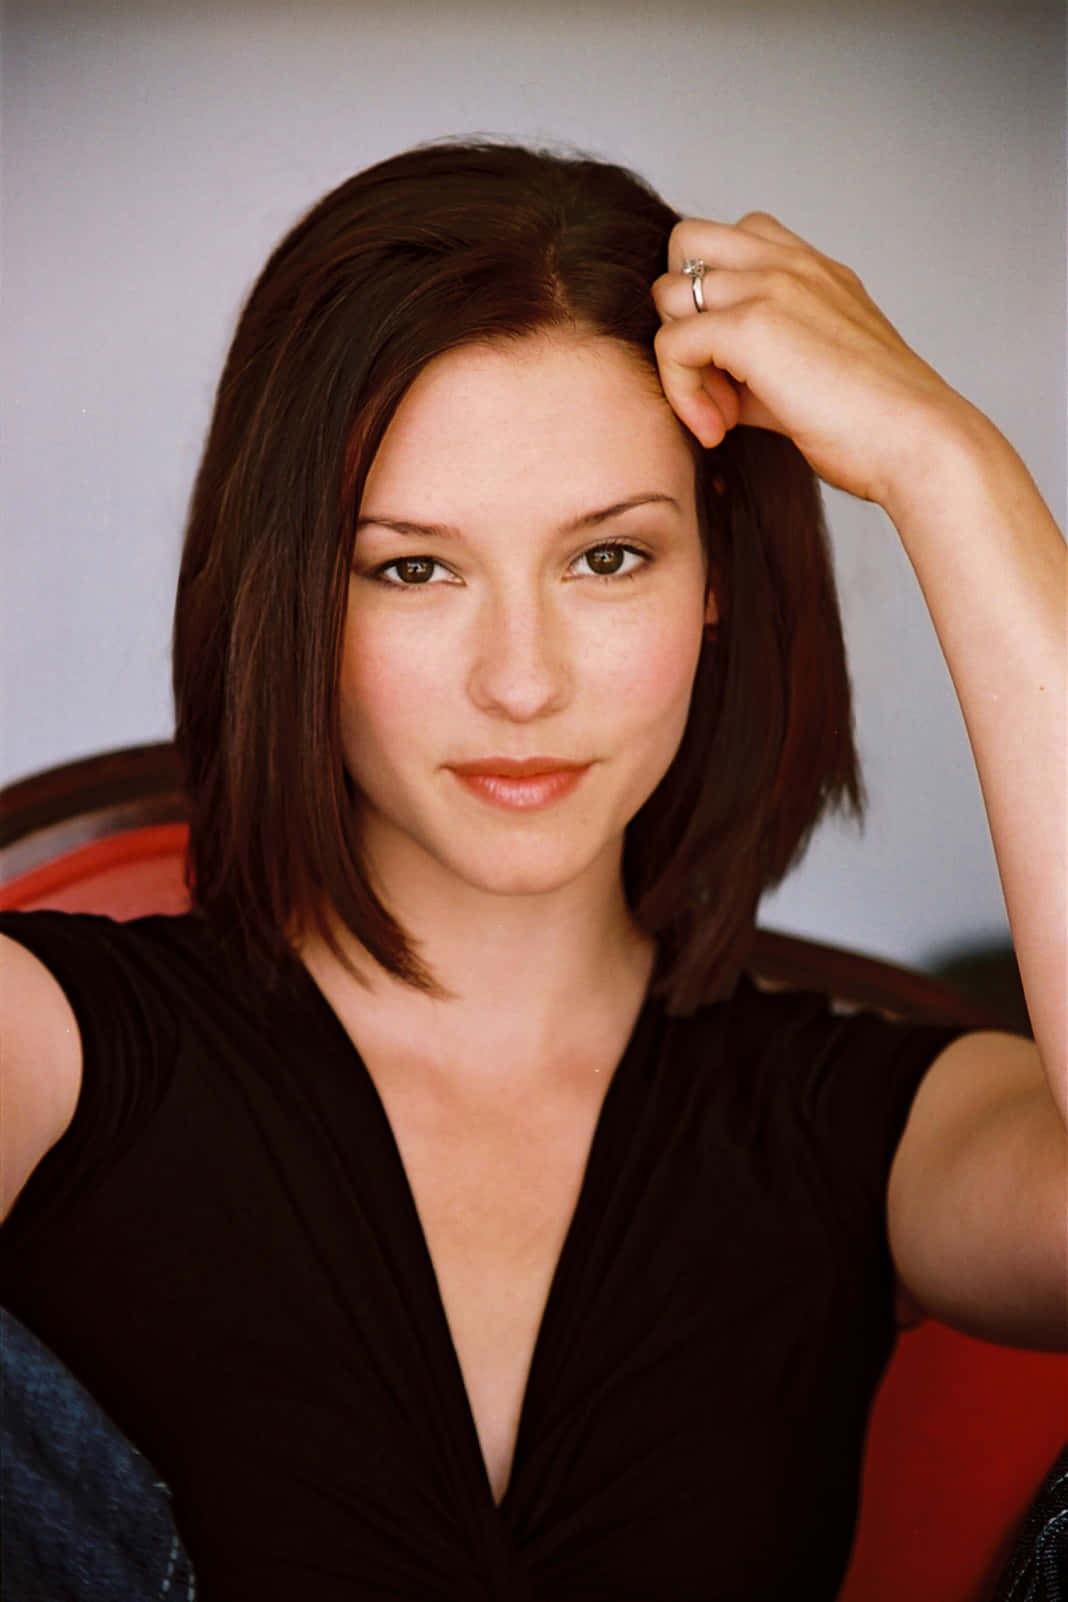 Caption: Chyler Leigh posing confidently during a photoshoot Wallpaper